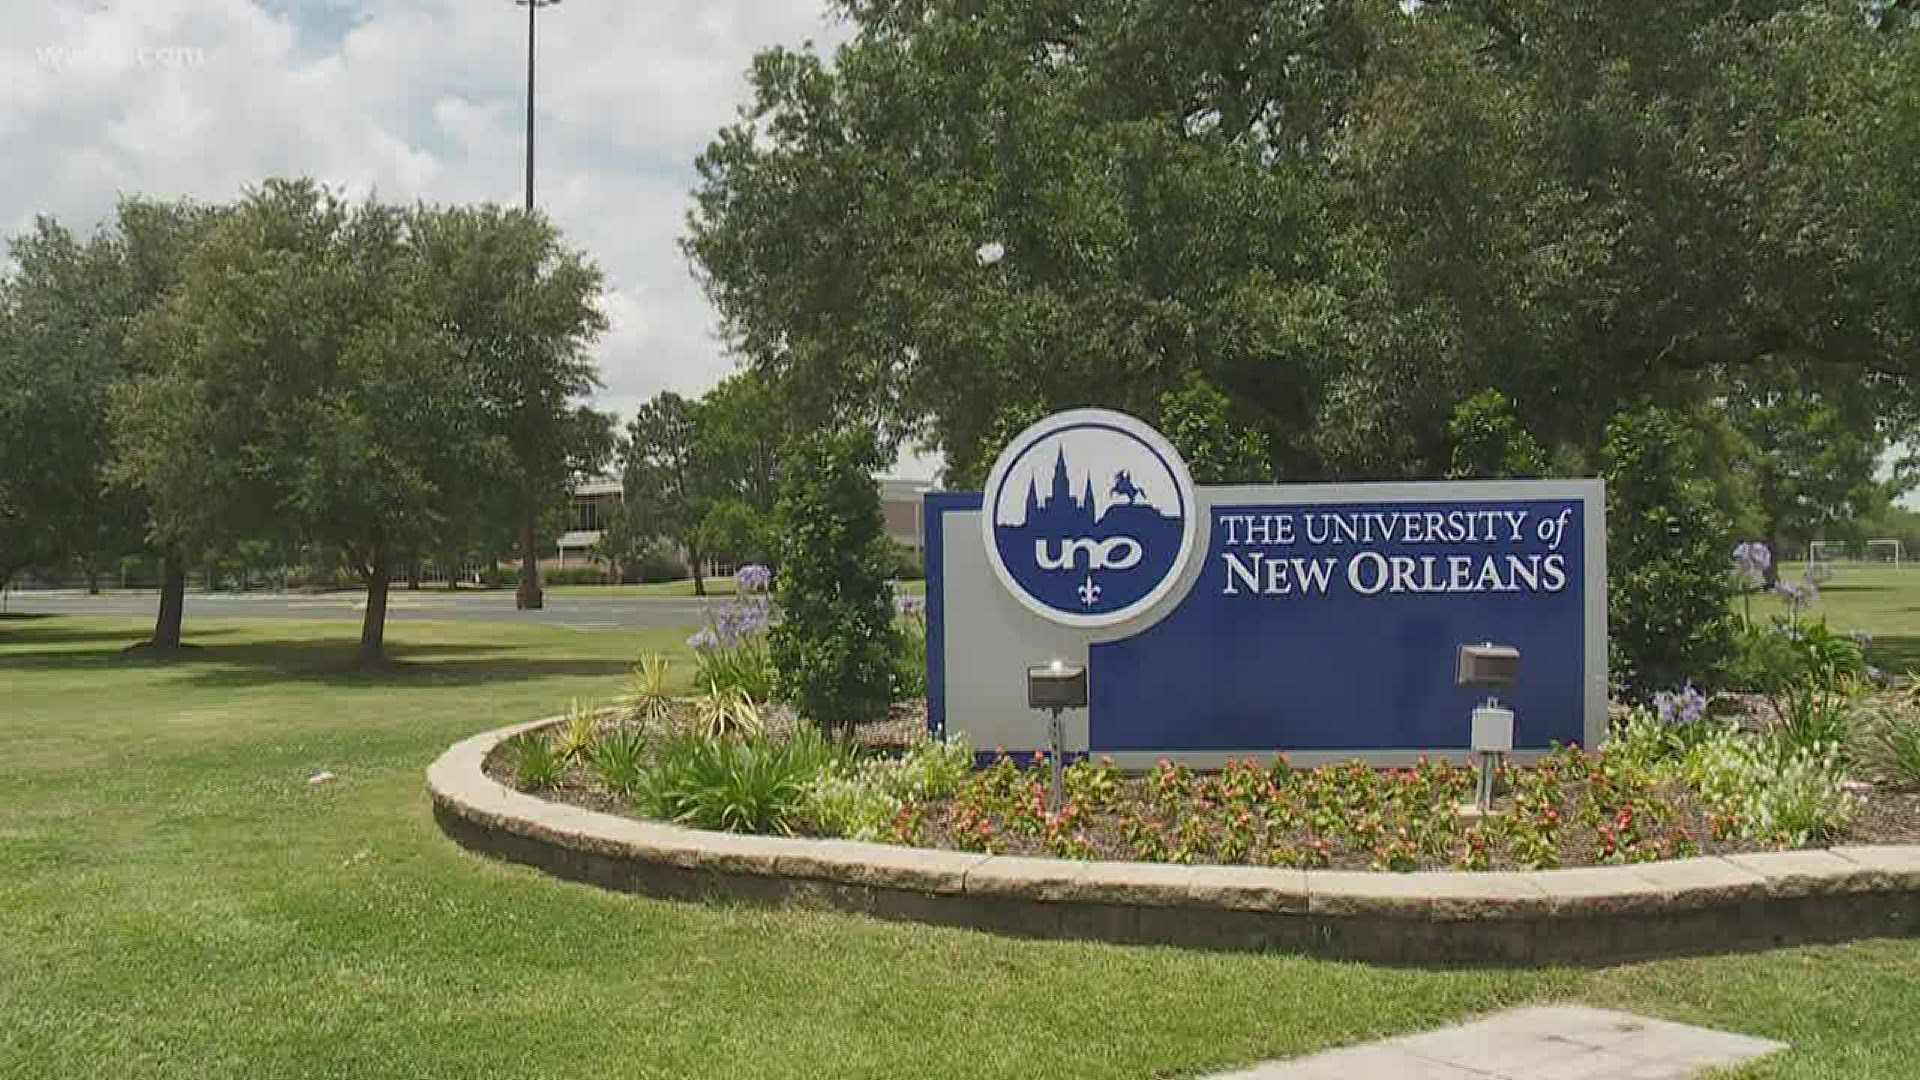 Dr. John Nicklow, president of the University of New Orleans, lays out plans for virtual graduation celebrations, plus safety strategies for next semester.